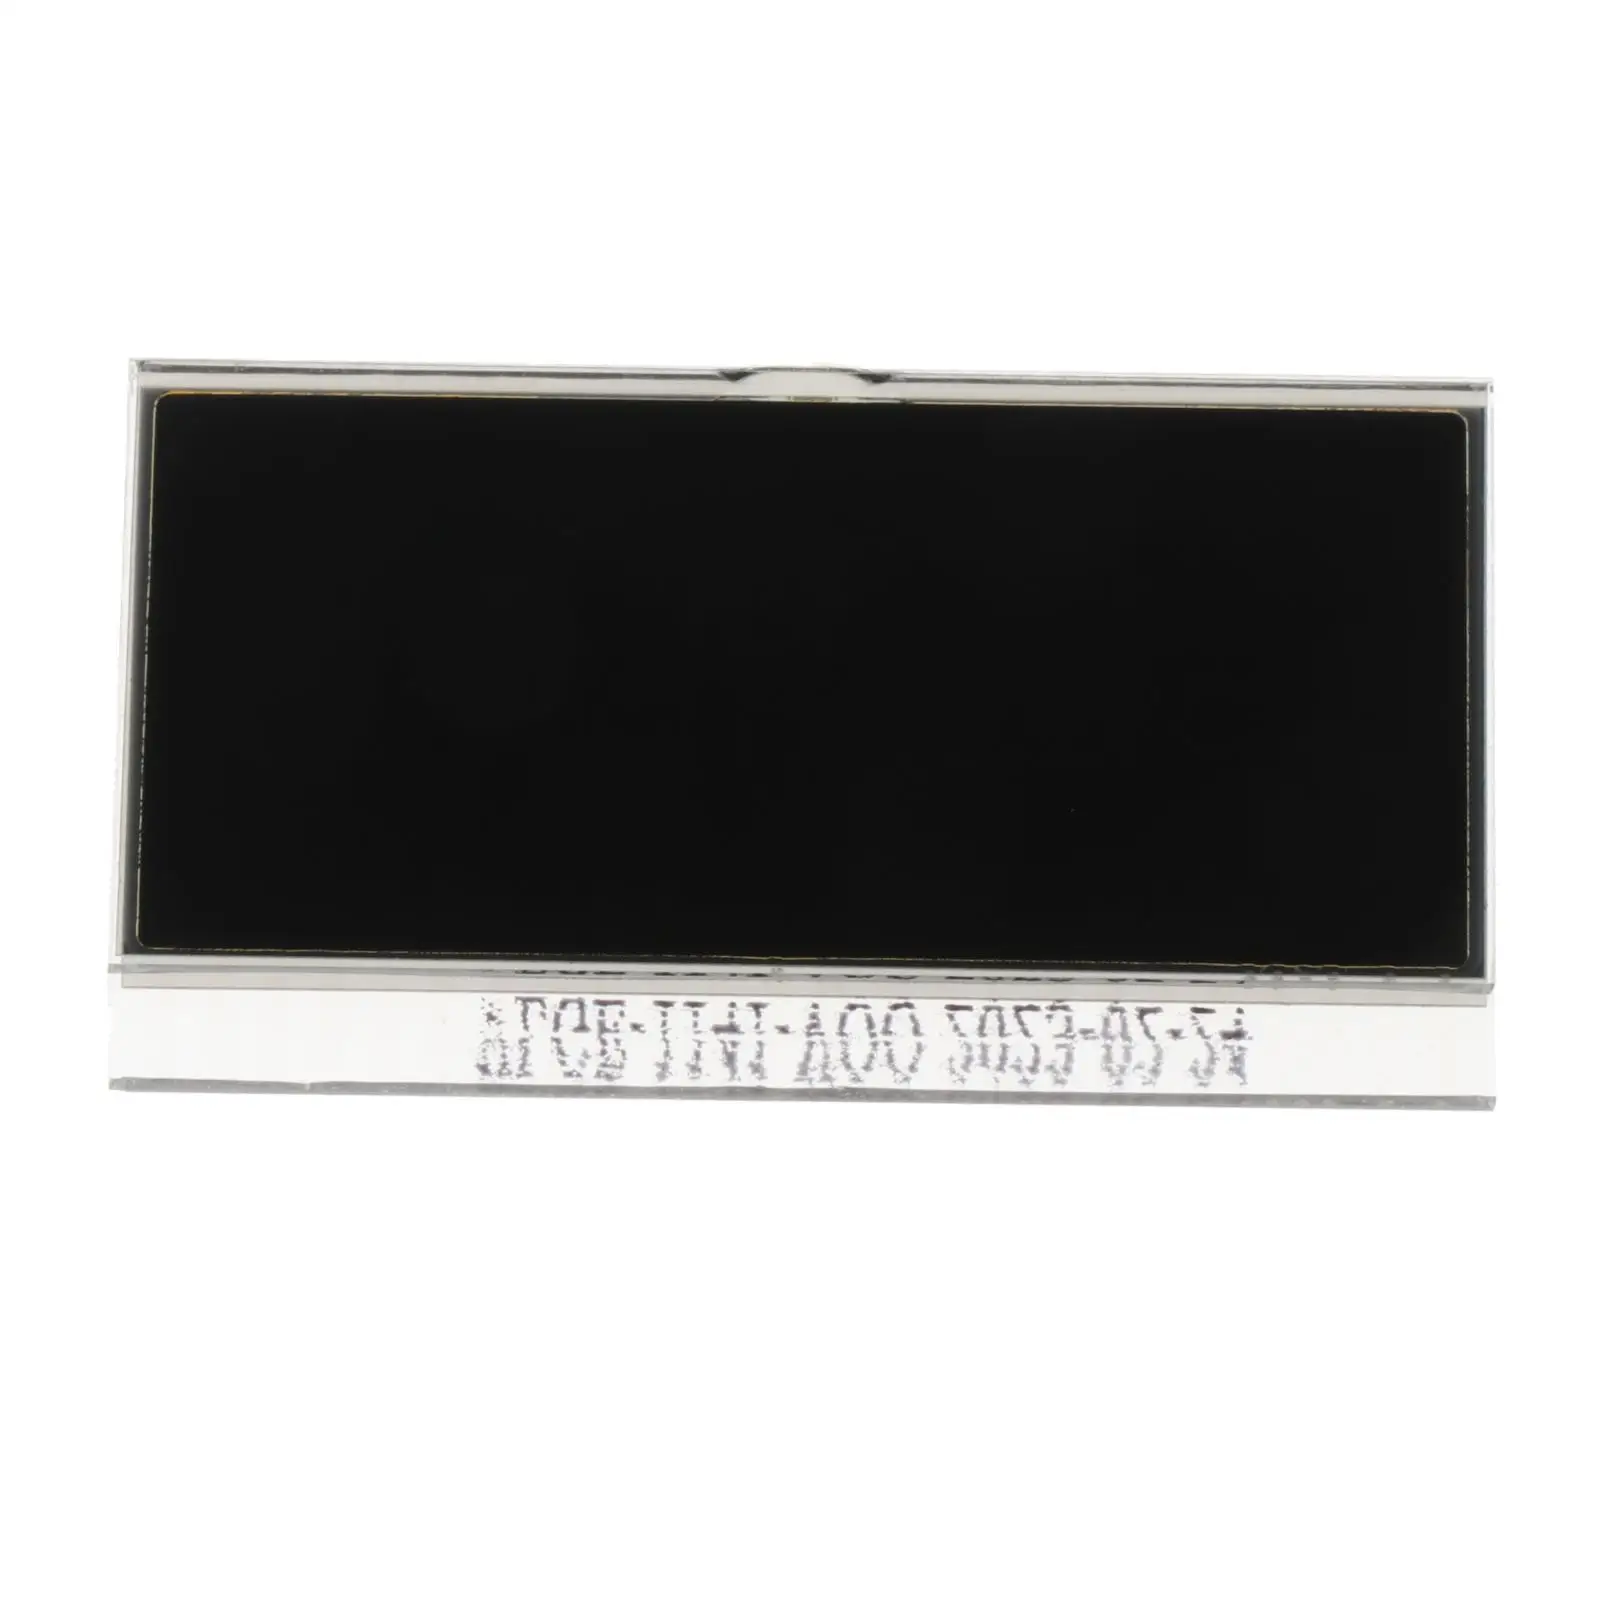 LCD Display Screen Air Conditioning Pixel Repair Replace High Performance for Audi A6 4F Q7 4L 2005-2012 Accessory